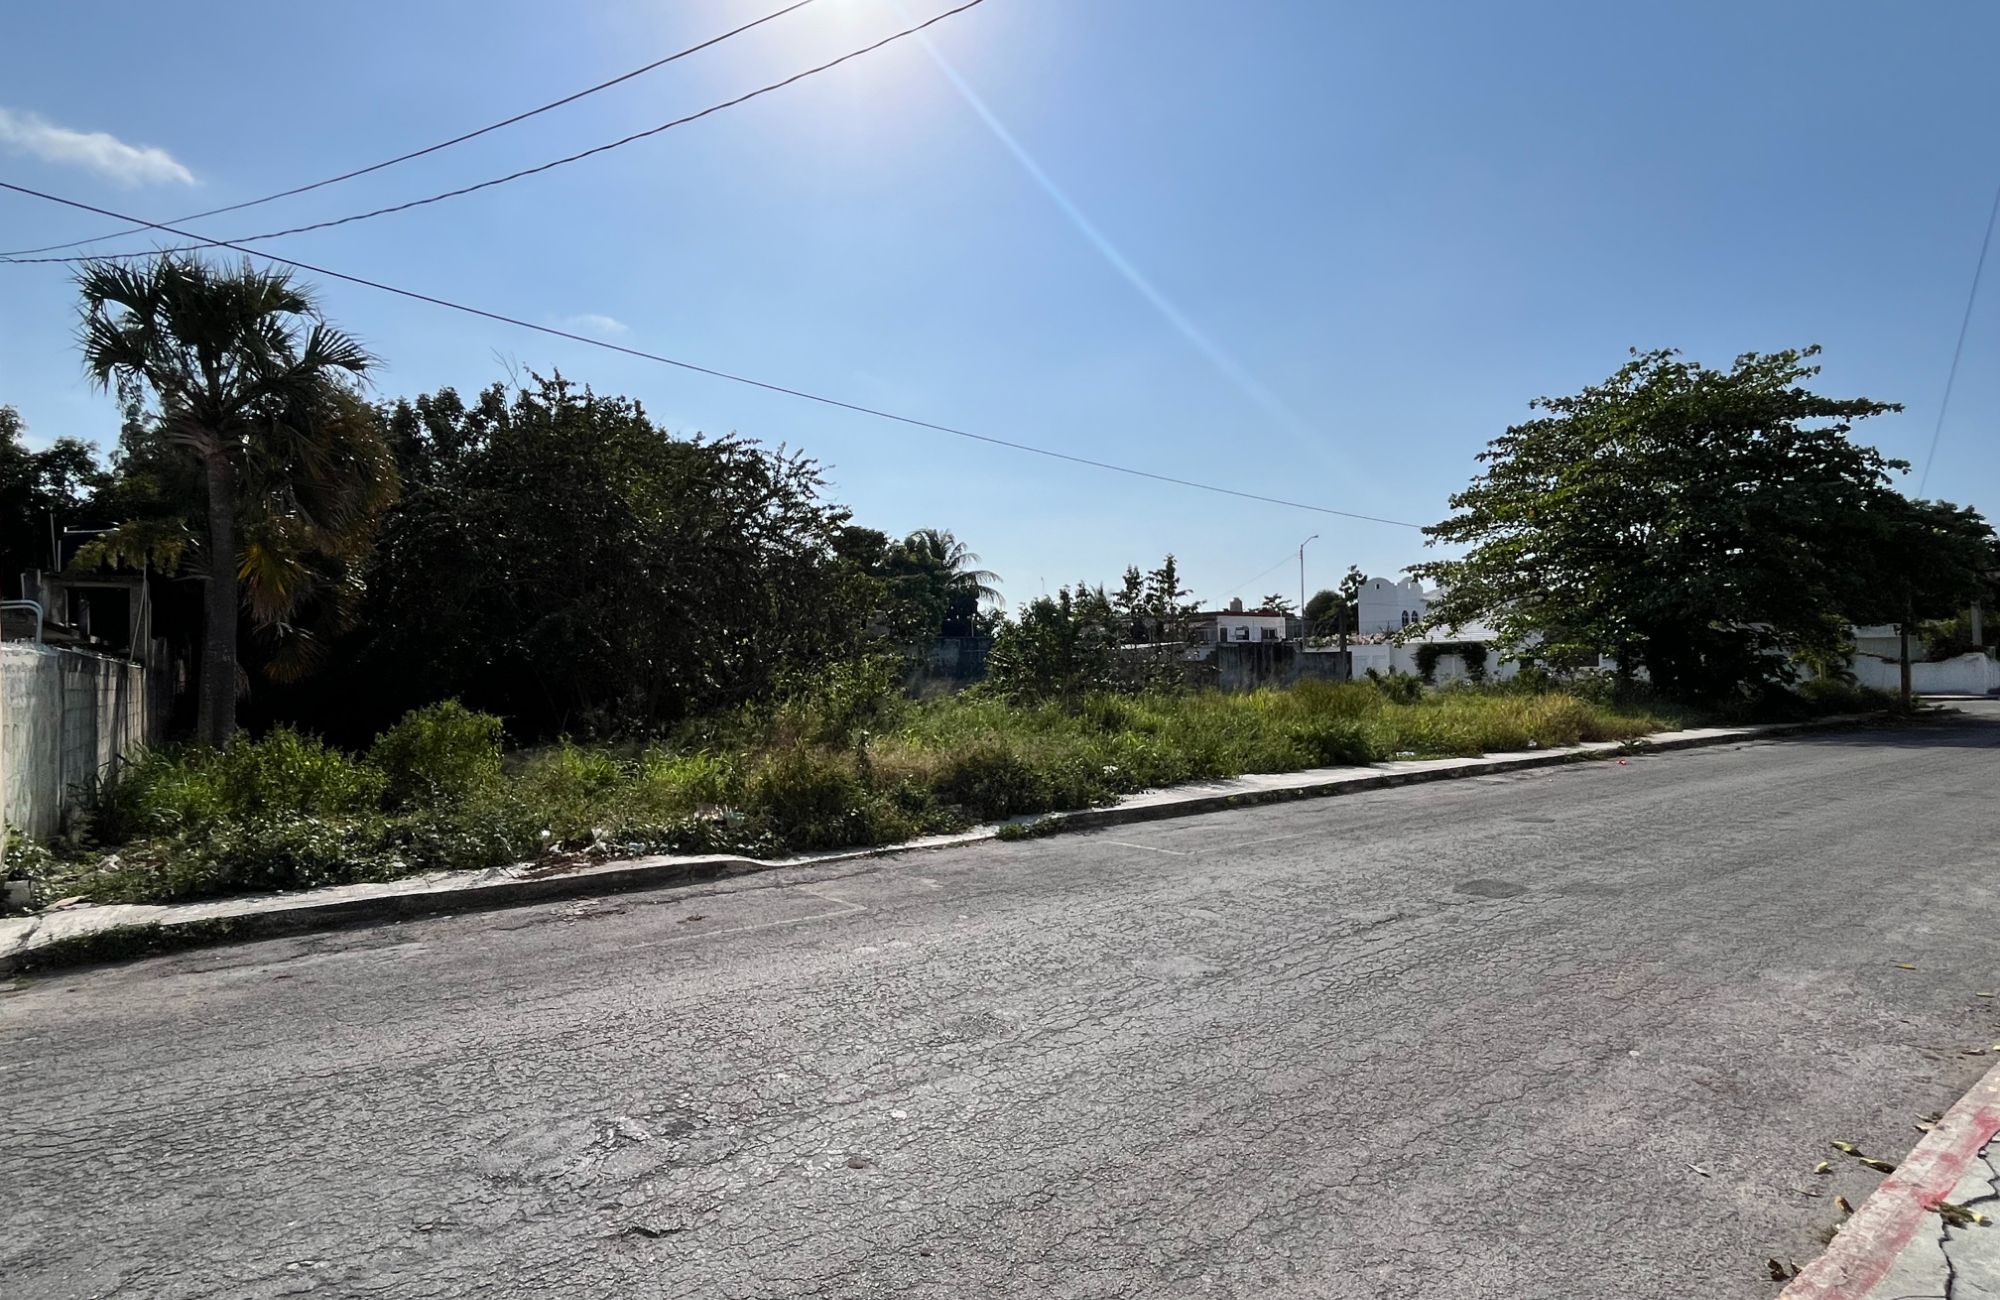 Land for sale, Investment opportunity in Cozumel, excellent location,